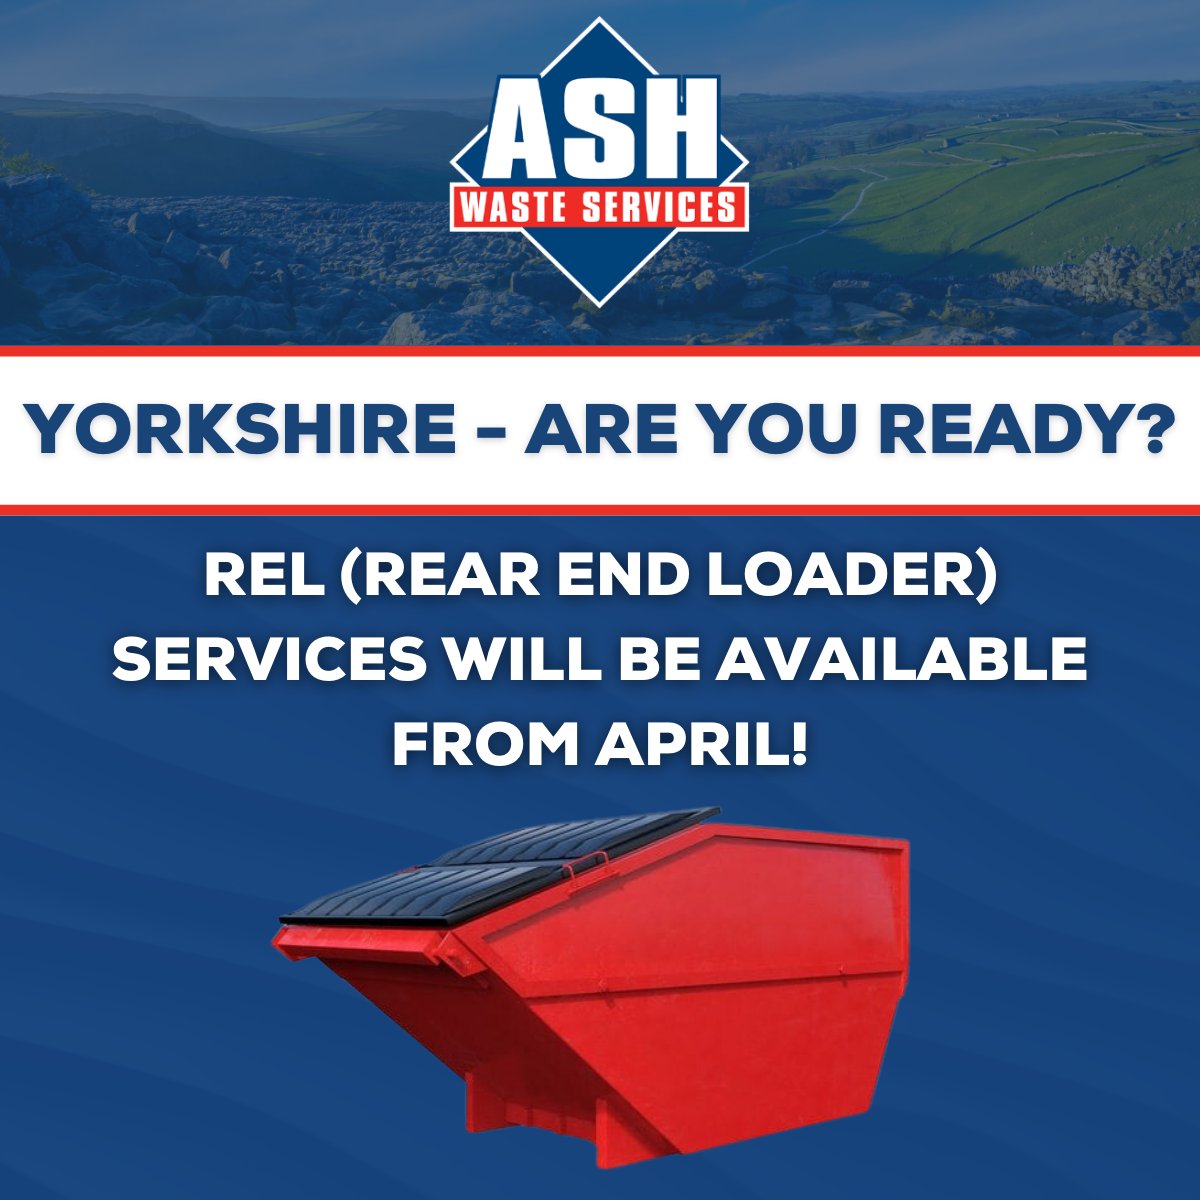 👉 NEW SERVICES IN YORKSHIRE!

Starting from April, REL services will be introduced in Yorkshire!

Contact us today for more information:
☎ 0800 035 0447
📧 enquiries@ashwasteservices.co.uk

#wastemanagement #wastedisposal #wastemanagementsolutions #yorkshire #recyclingindustry